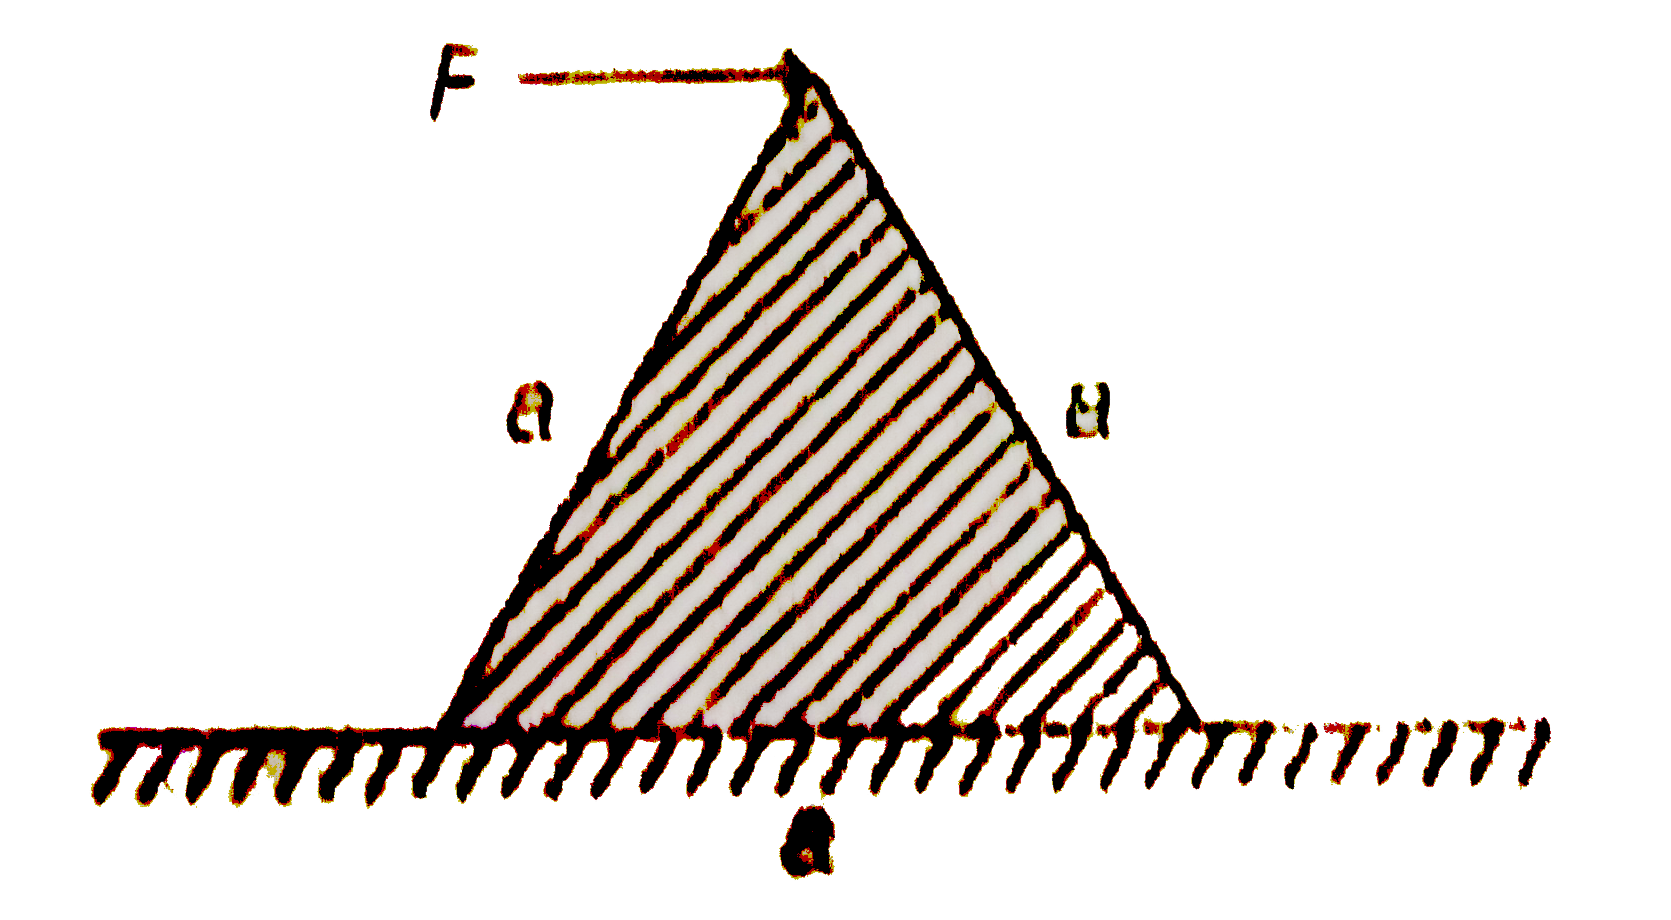 An equilateral prism of mass m rests on a rough horizontal surface with cofficent of friction mu. A horizontal force F is applied on the prism as shown in the figure. If the cofficent of the friction is sufficently high  so that the prism does not slide before toppling, then the minimum force required to topple the prism is